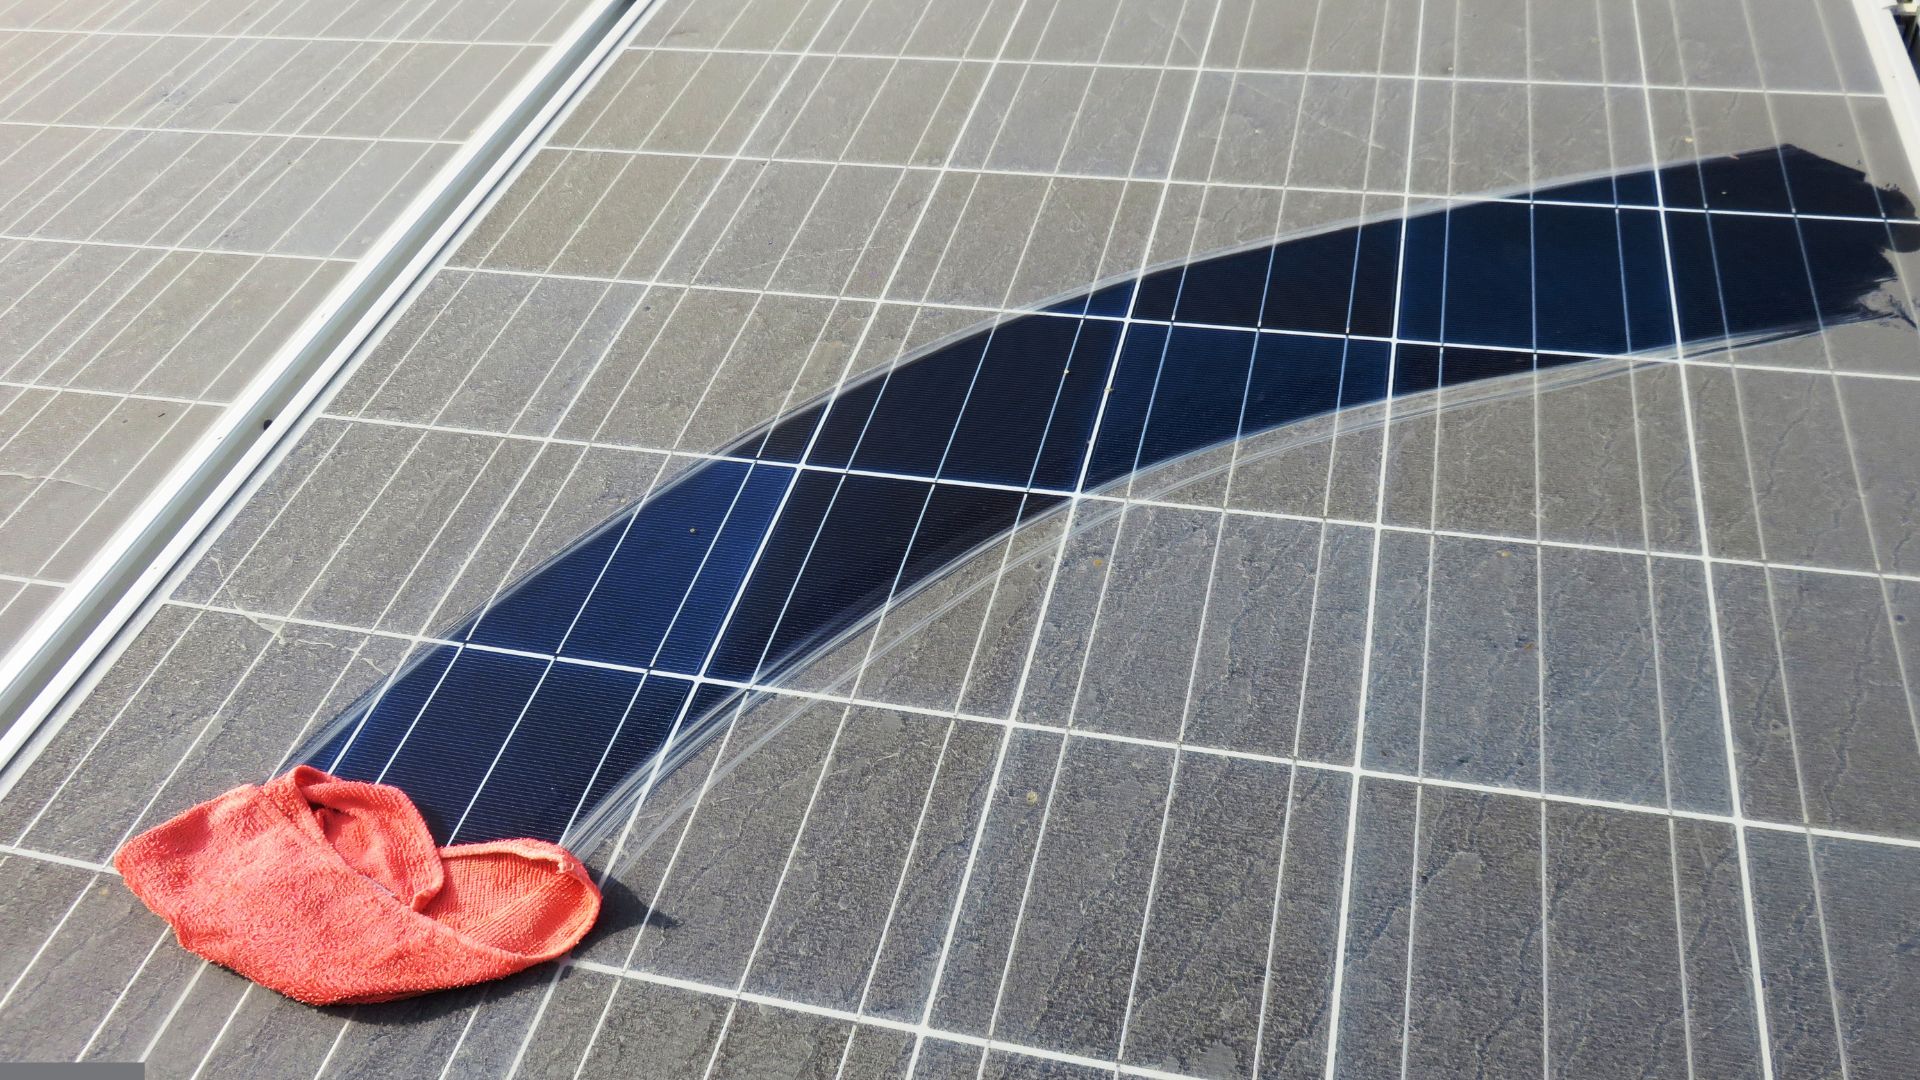 Detail of a red cleaning cloth left on photovoltaic solar panels after cleaning.